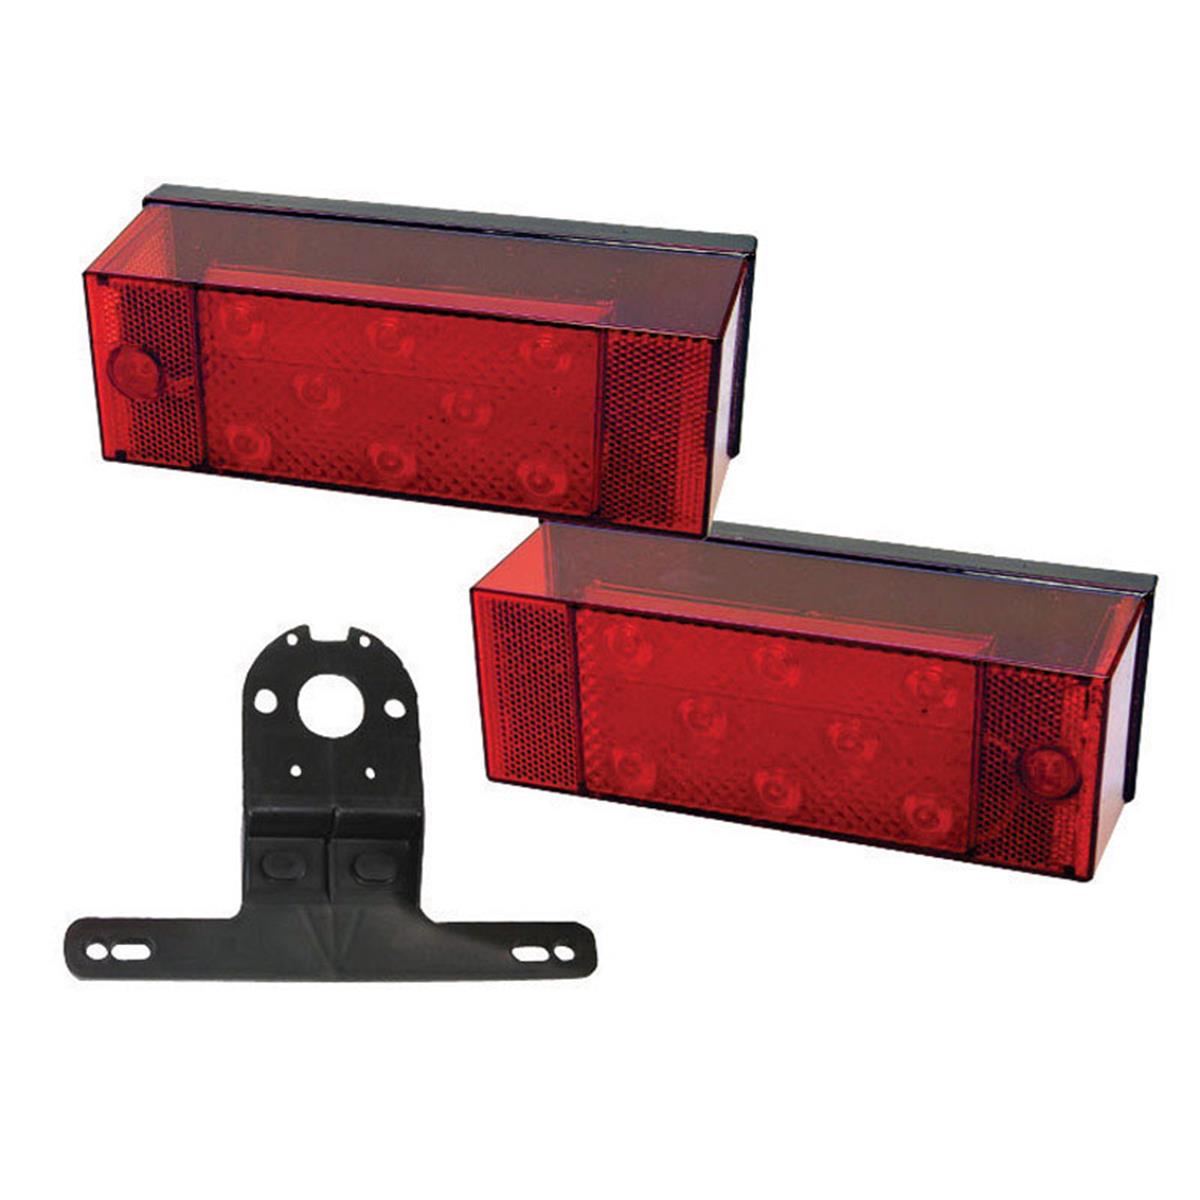 Picture of Peterson Manufacturing V947 LED Trailer Light Kit